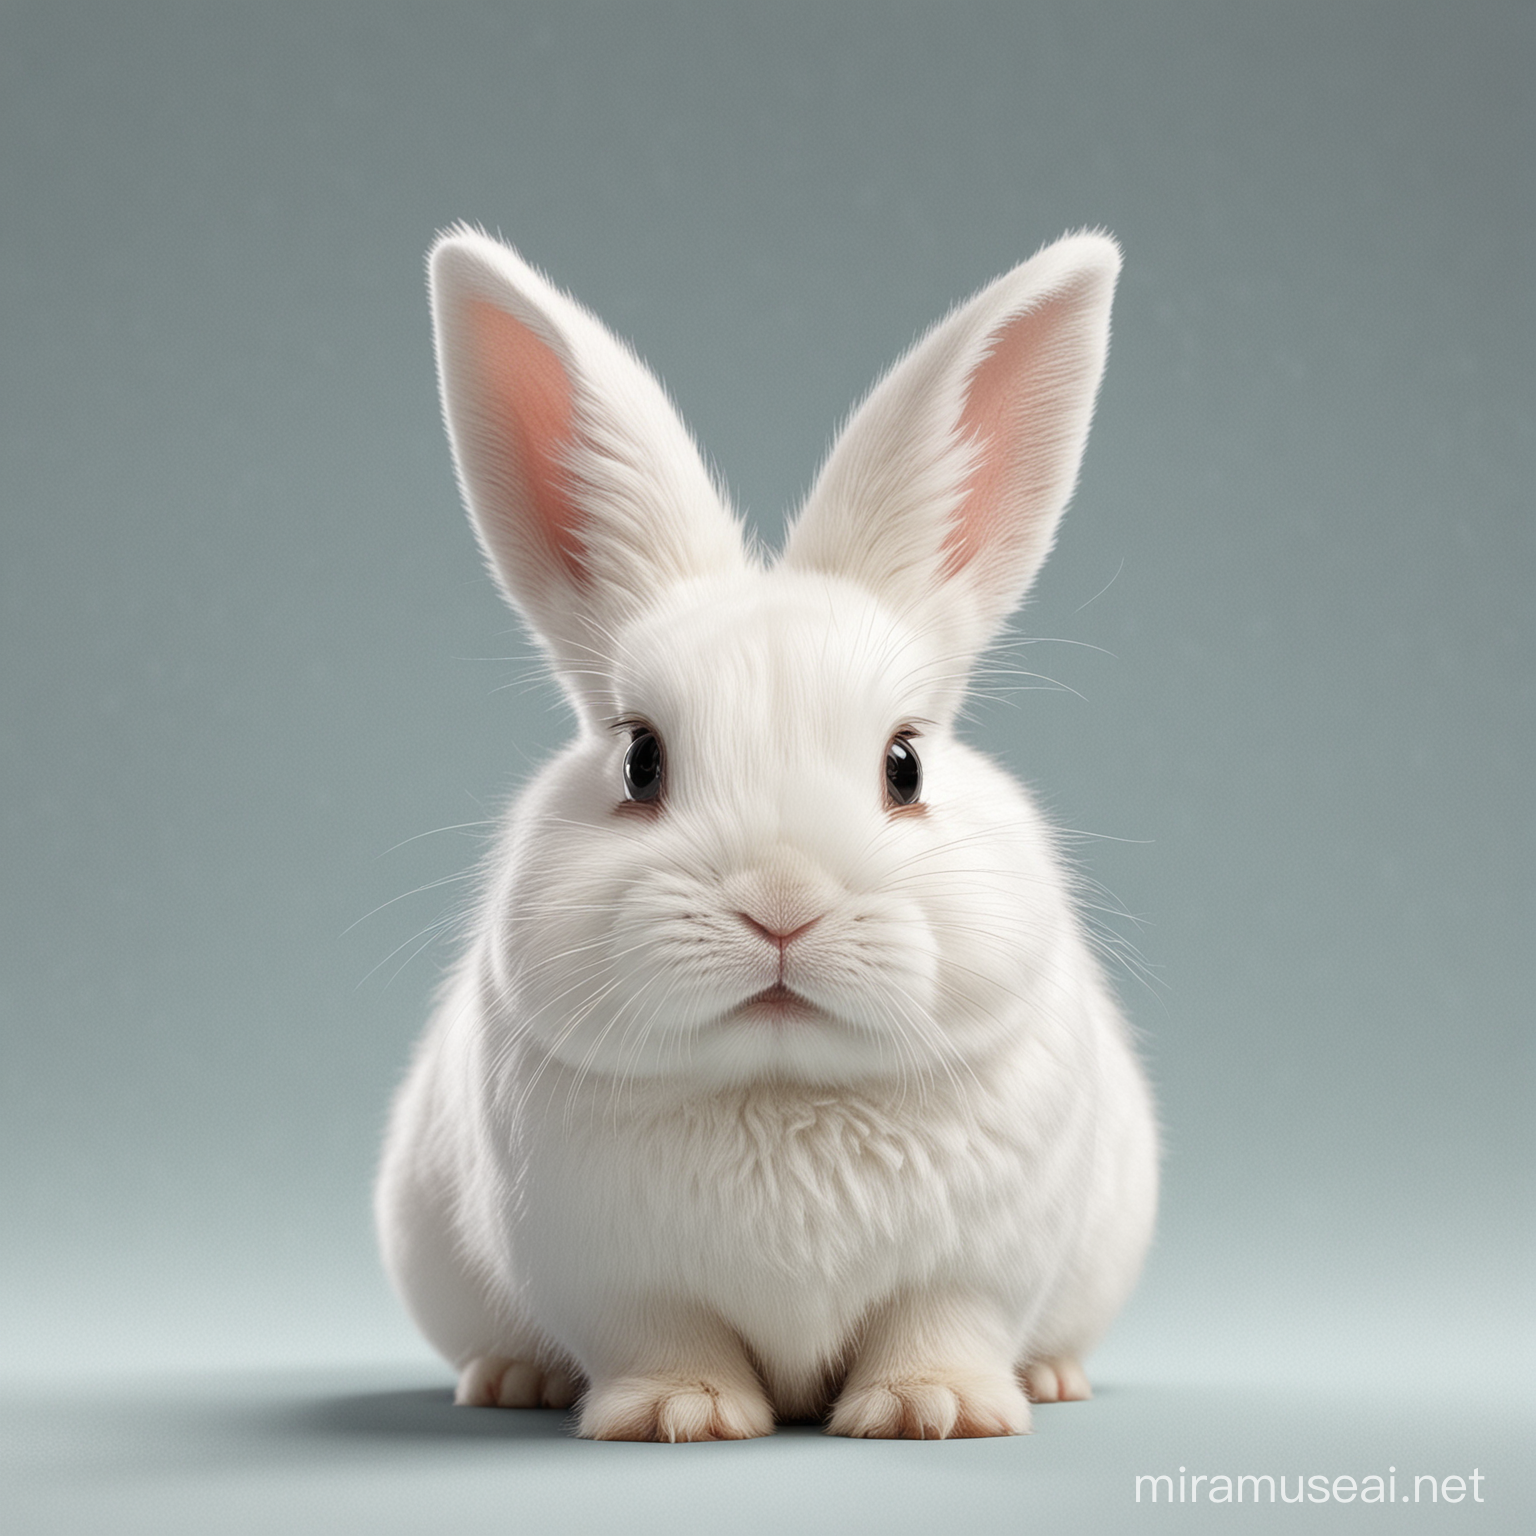 Cute Hotot Bunny Portrait Adorable FrontFacing Rabbit with No Background